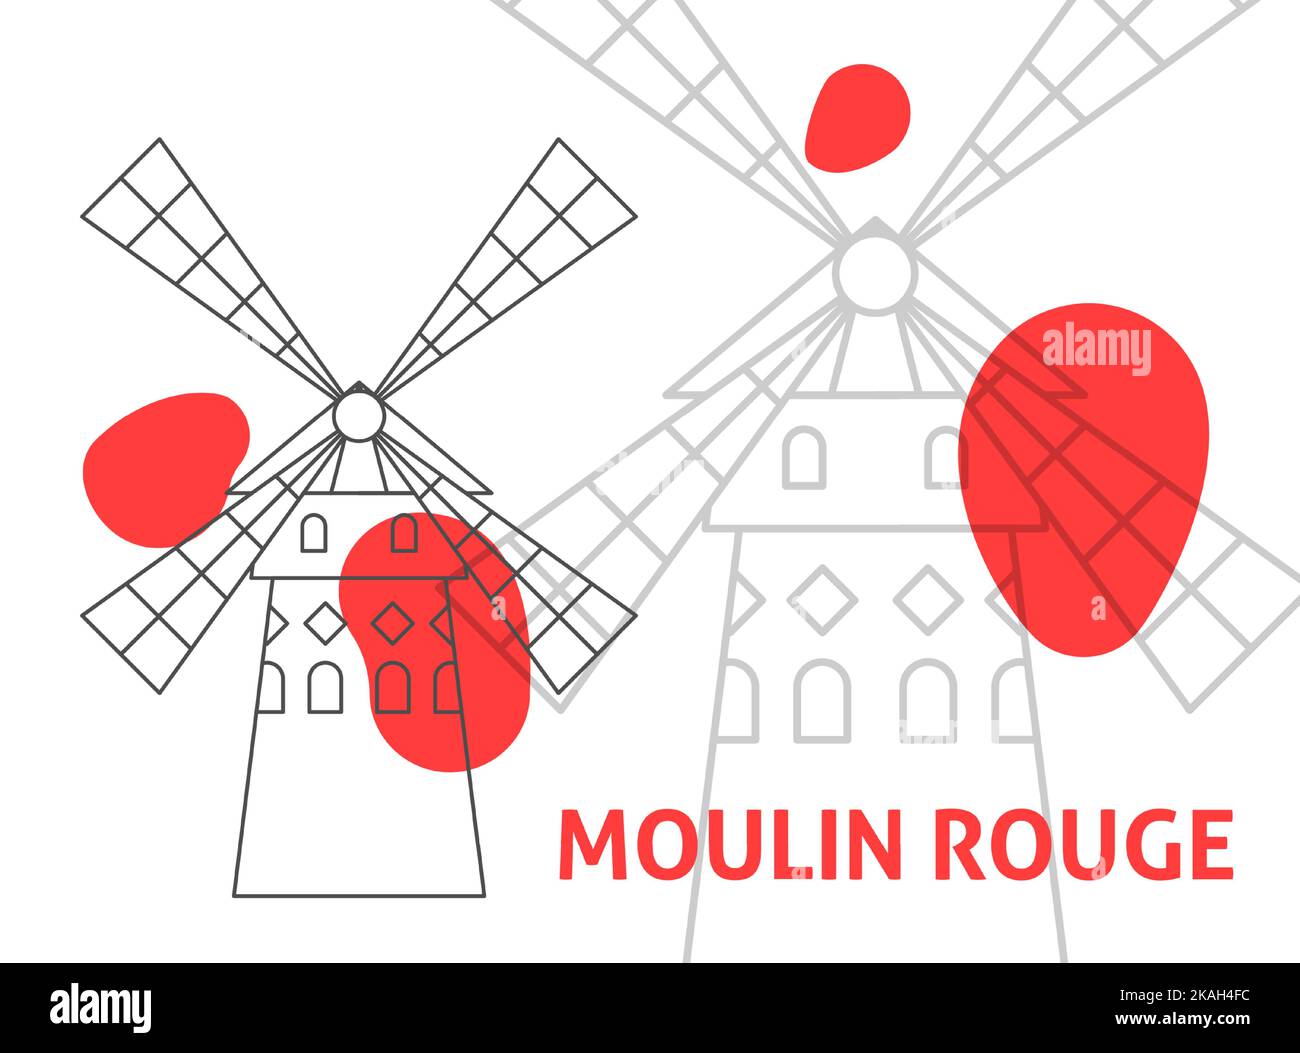 Moulin Rouge Banner Concept Stock Vector